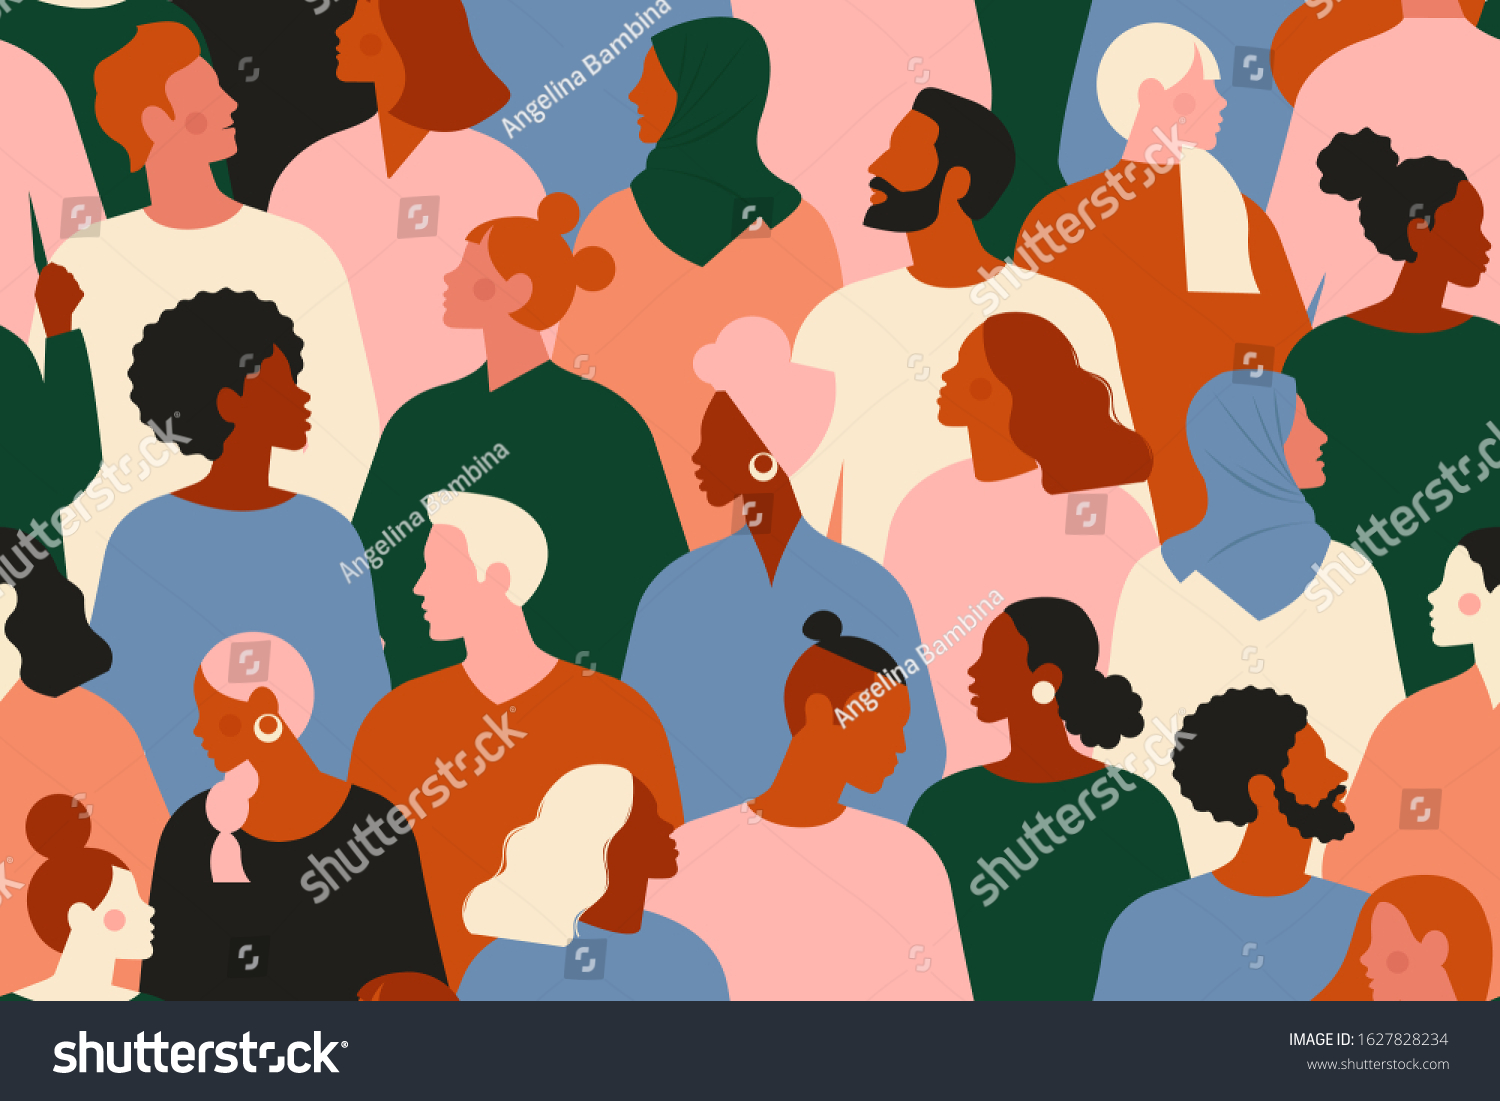 Crowd of young and elderly men and women in trendy hipster clothes. Diverse group of stylish people standing together. Society or population, social diversity. Flat cartoon vector illustration. #1627828234